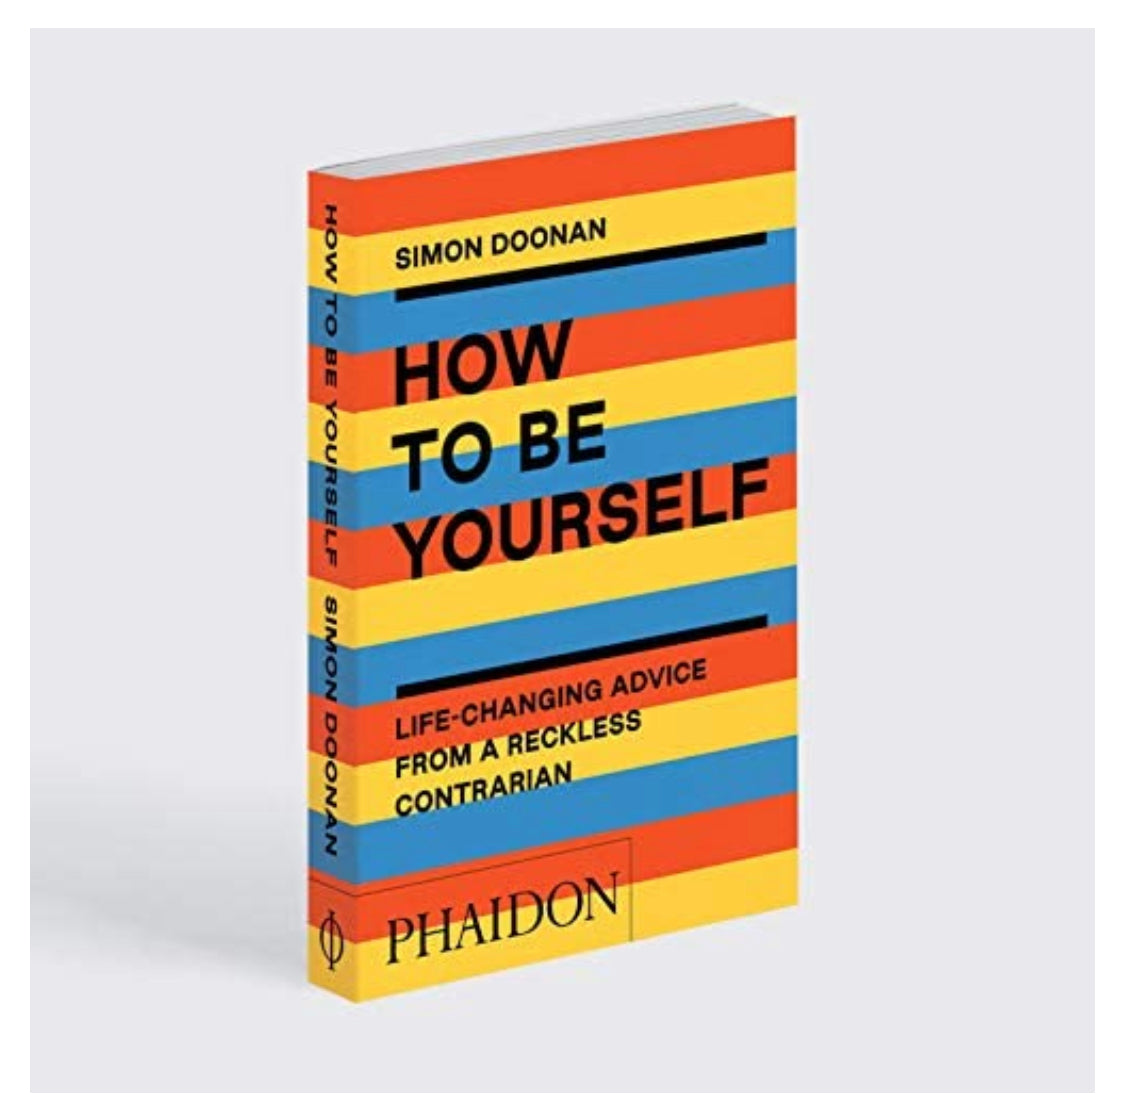 How to Be Yourself: Life-Changing Advice from a Reckless Contrarian